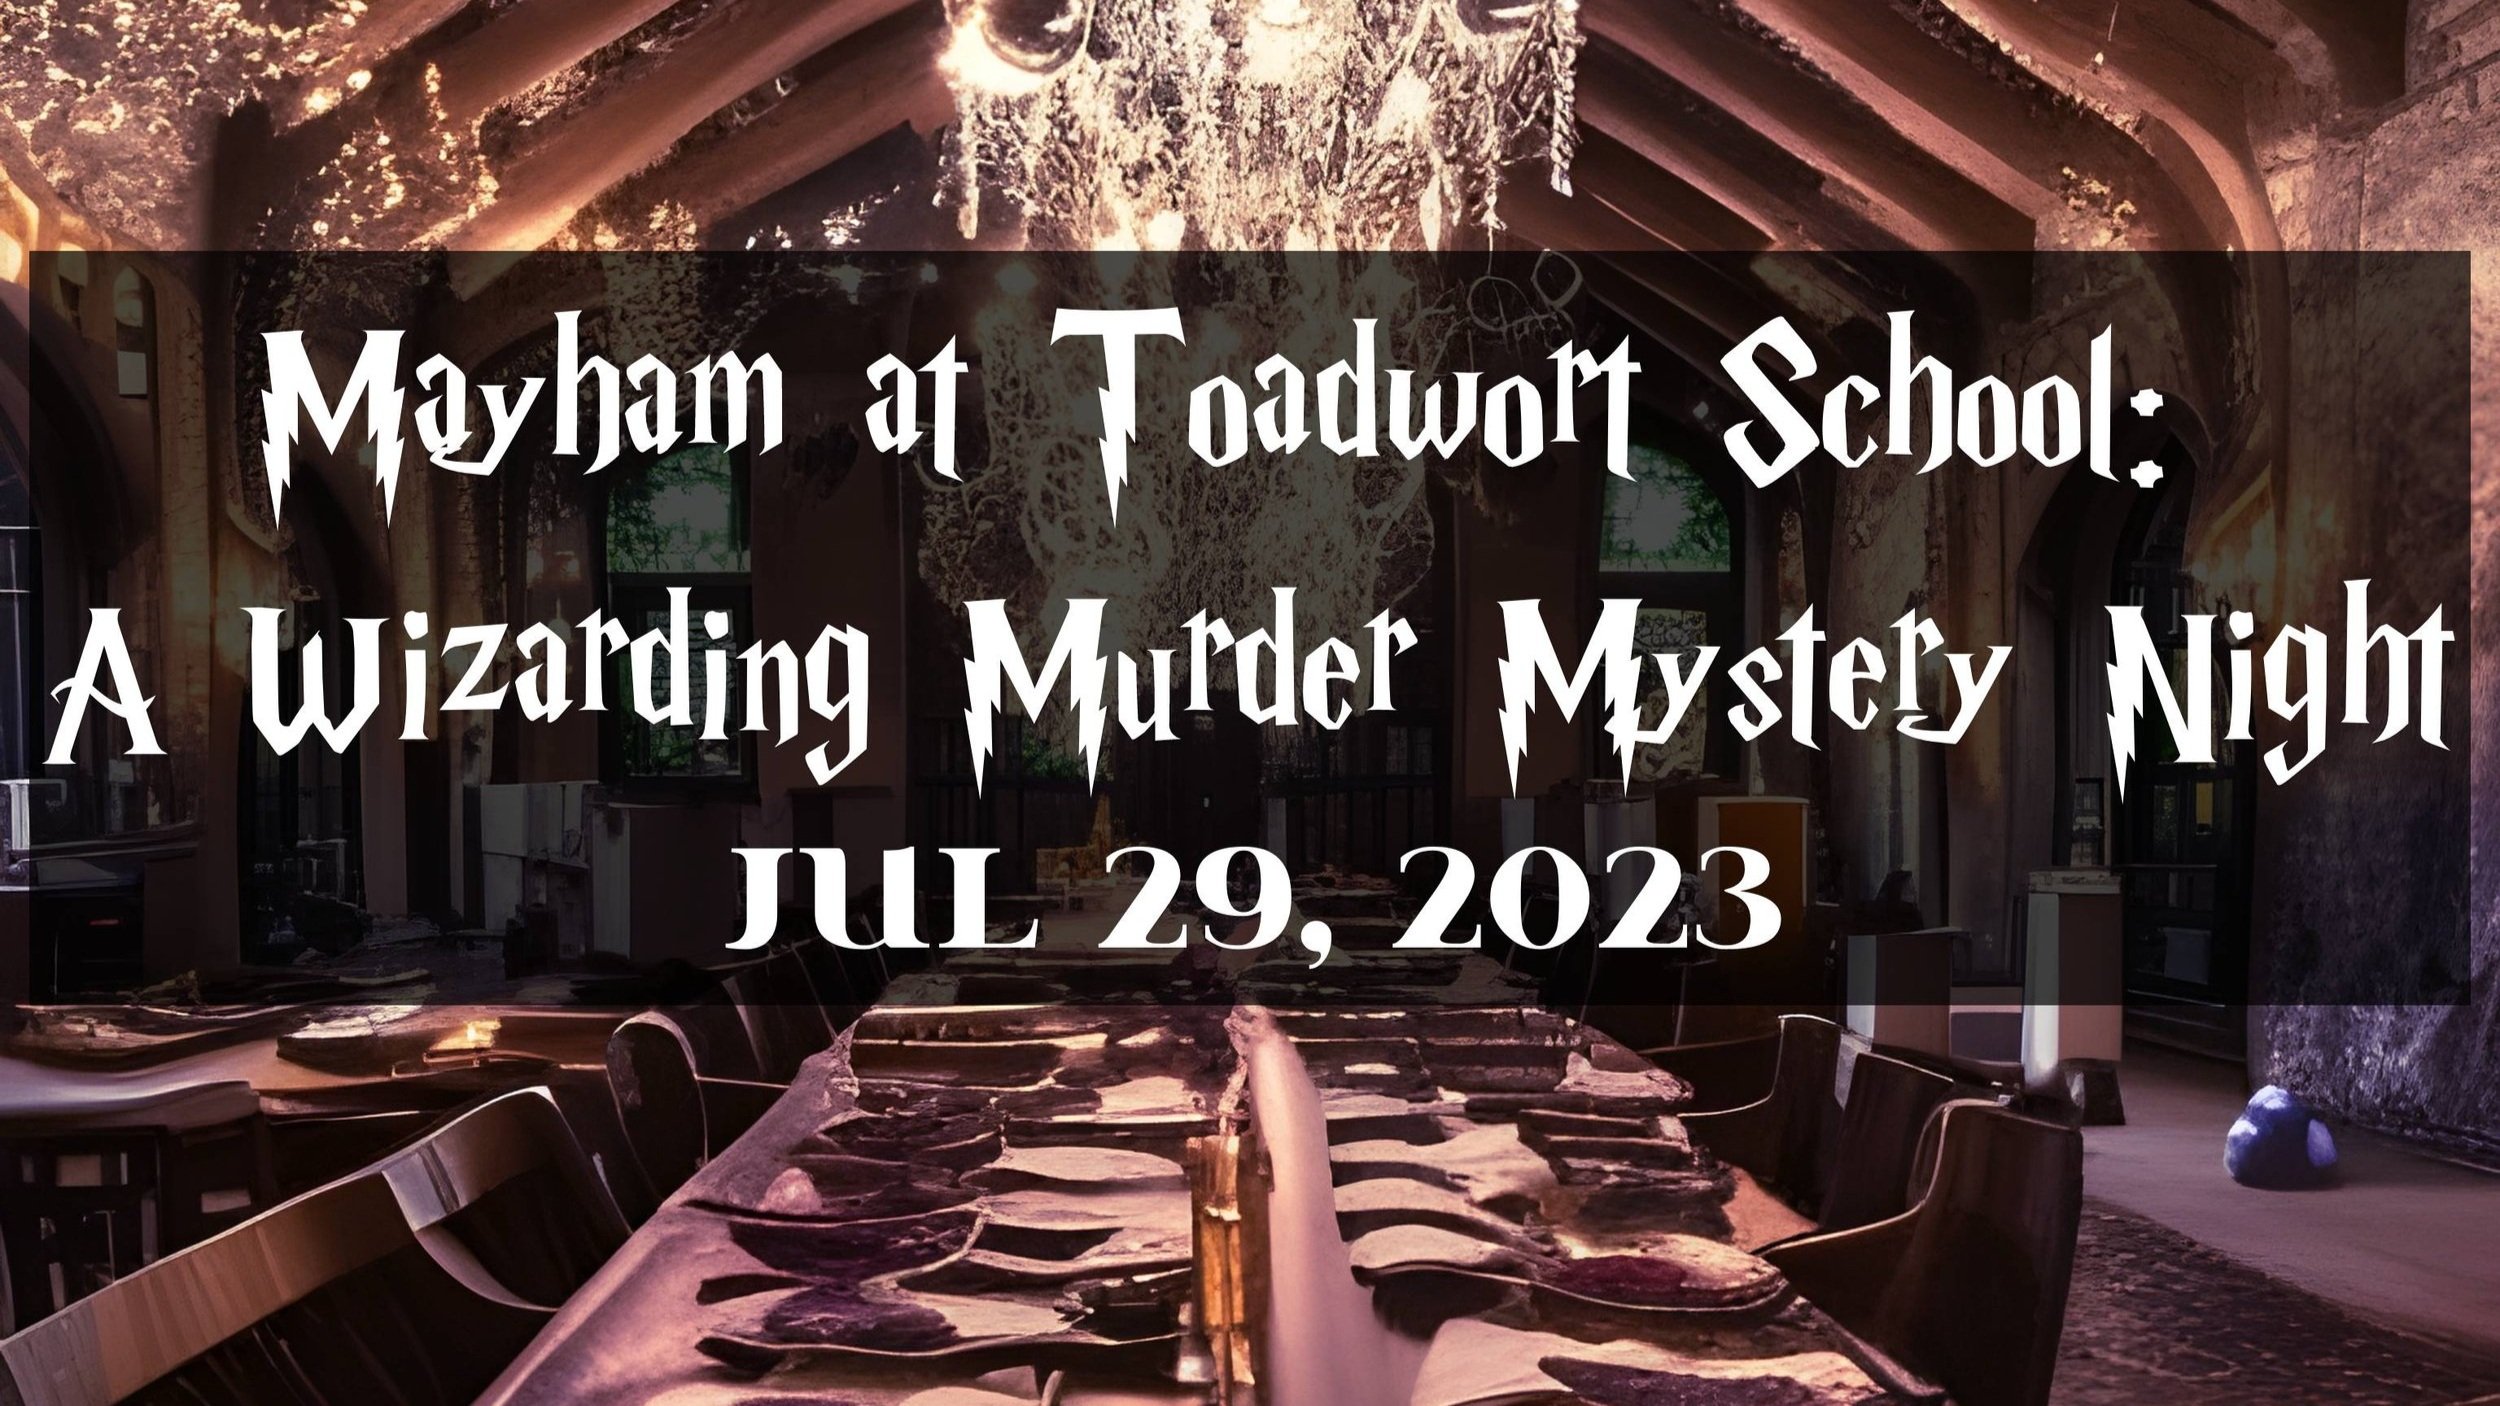 Uncover Thrilling Secrets: Murder Mystery Dinner Party Unveiled!